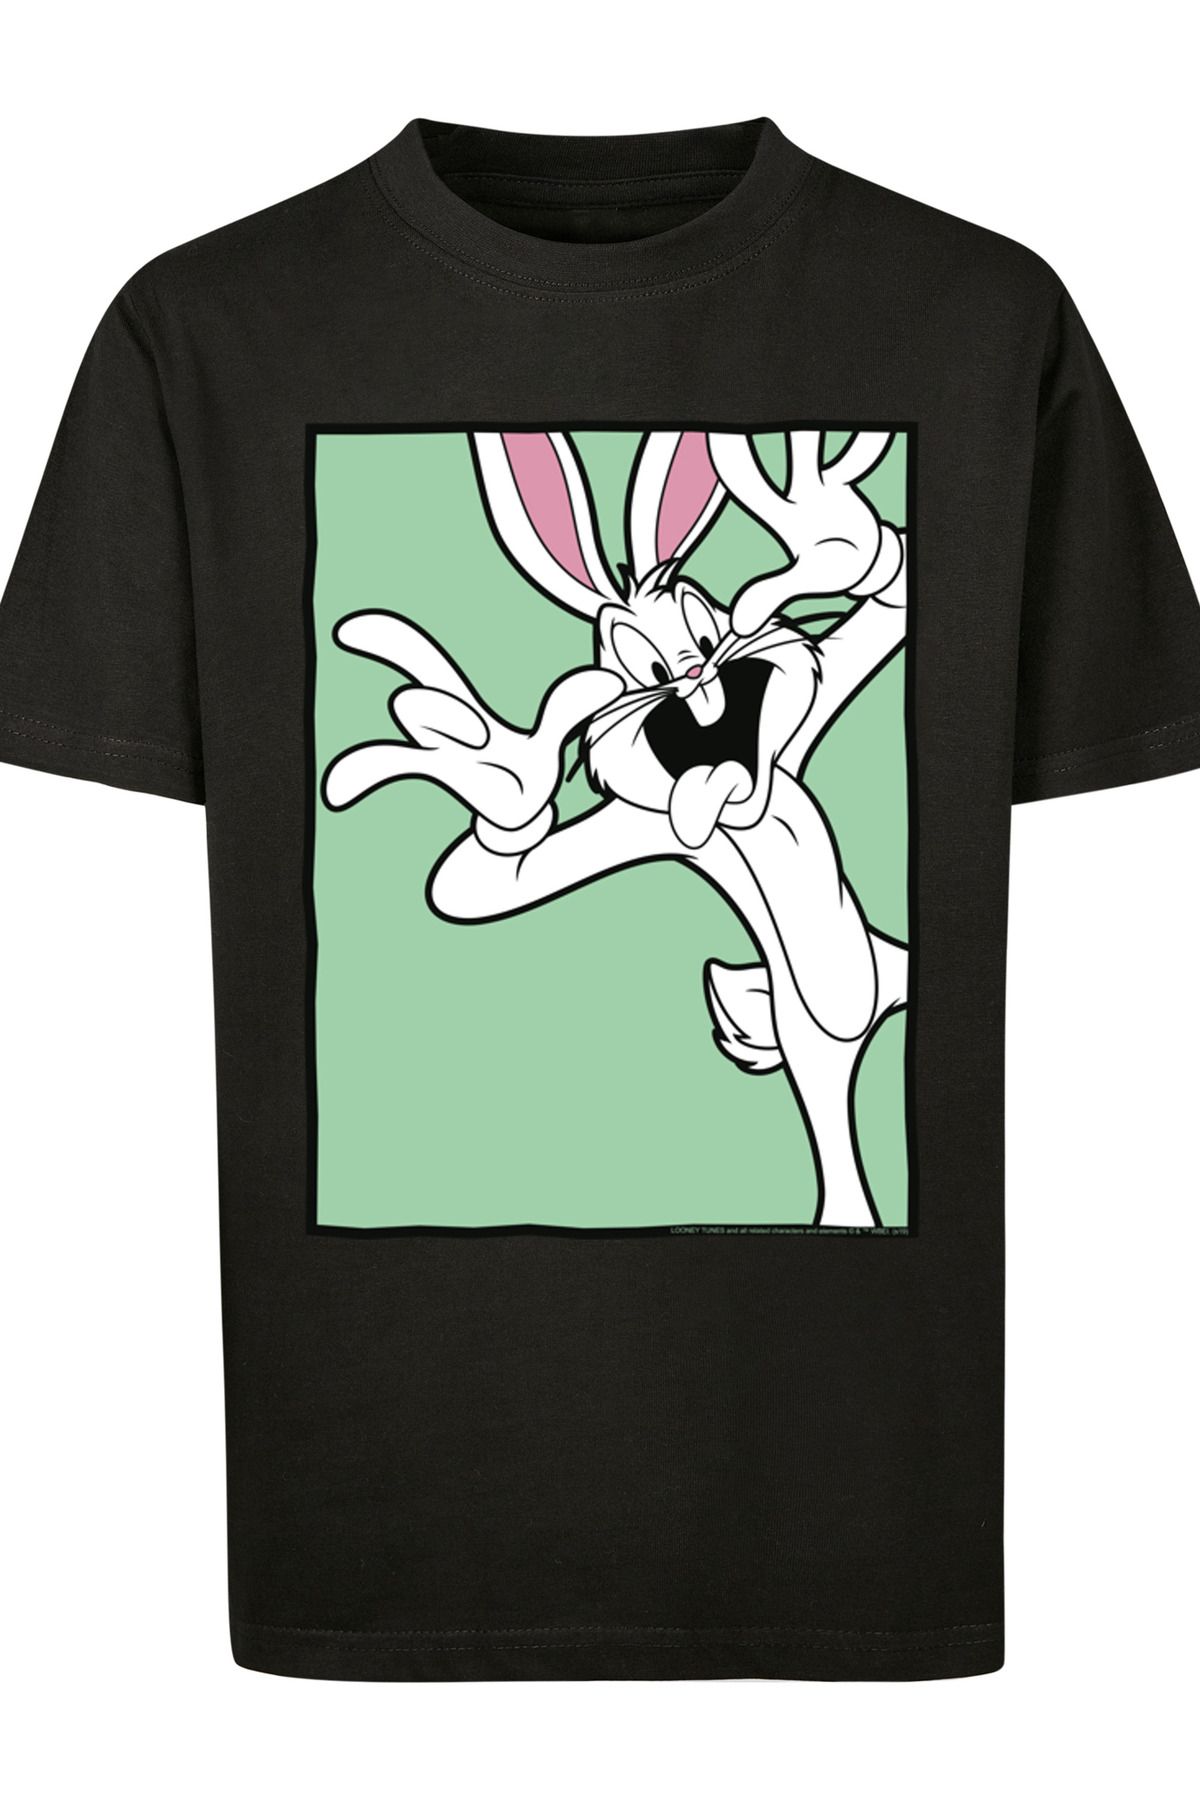 F4NT4STIC Kinder Looney Kids Trendyol Funny Shirt T- Bugs Bunny Tunes Face-WHT - mit Basic